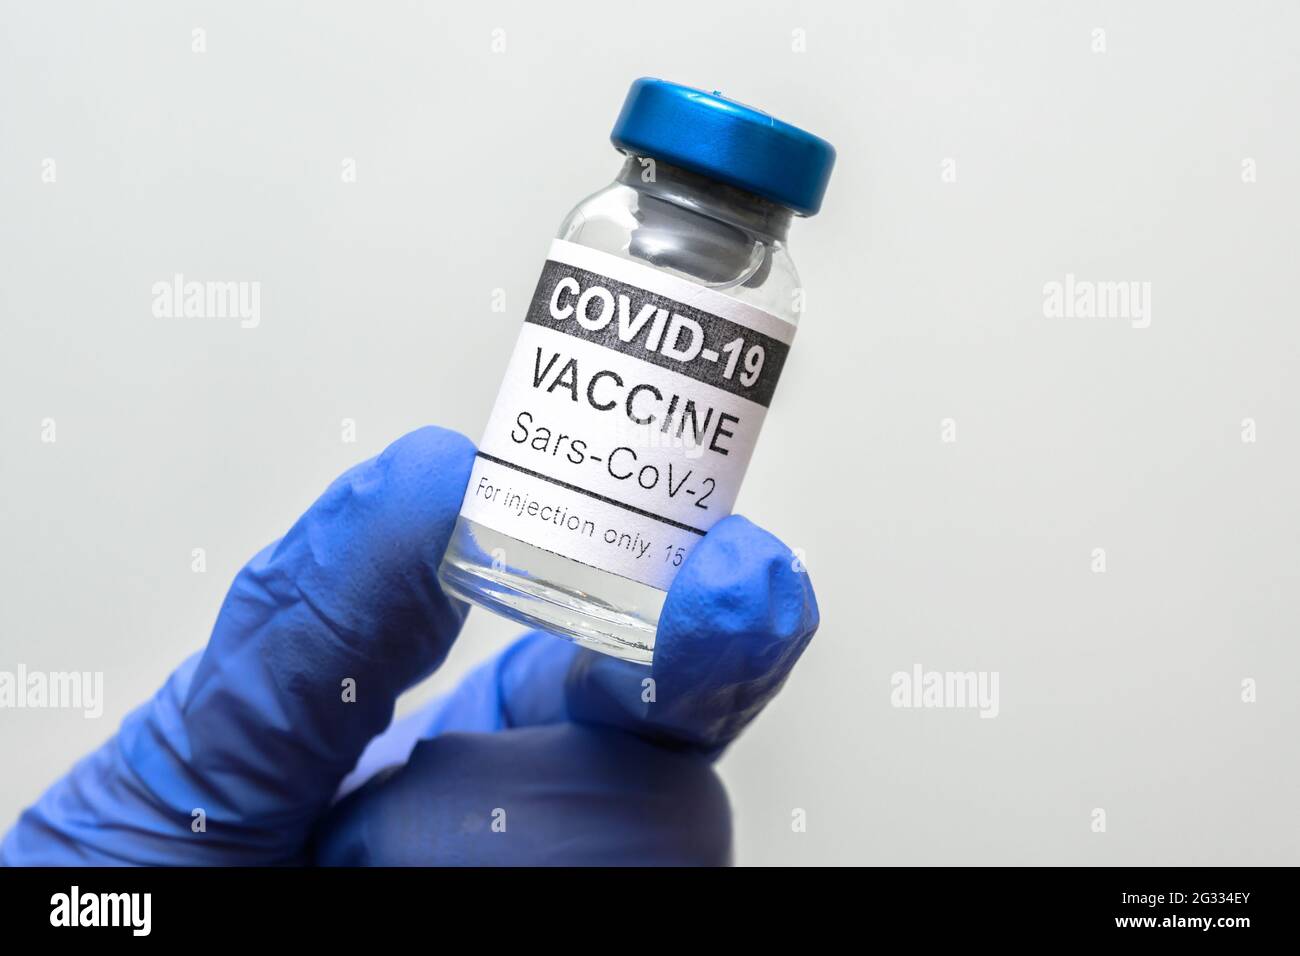 COVID-19 vaccine vial on white background, coronavirus vaccine bottle in doctor gloved hand close-up. Concept of medicine, vaccination, immunization, Stock Photo